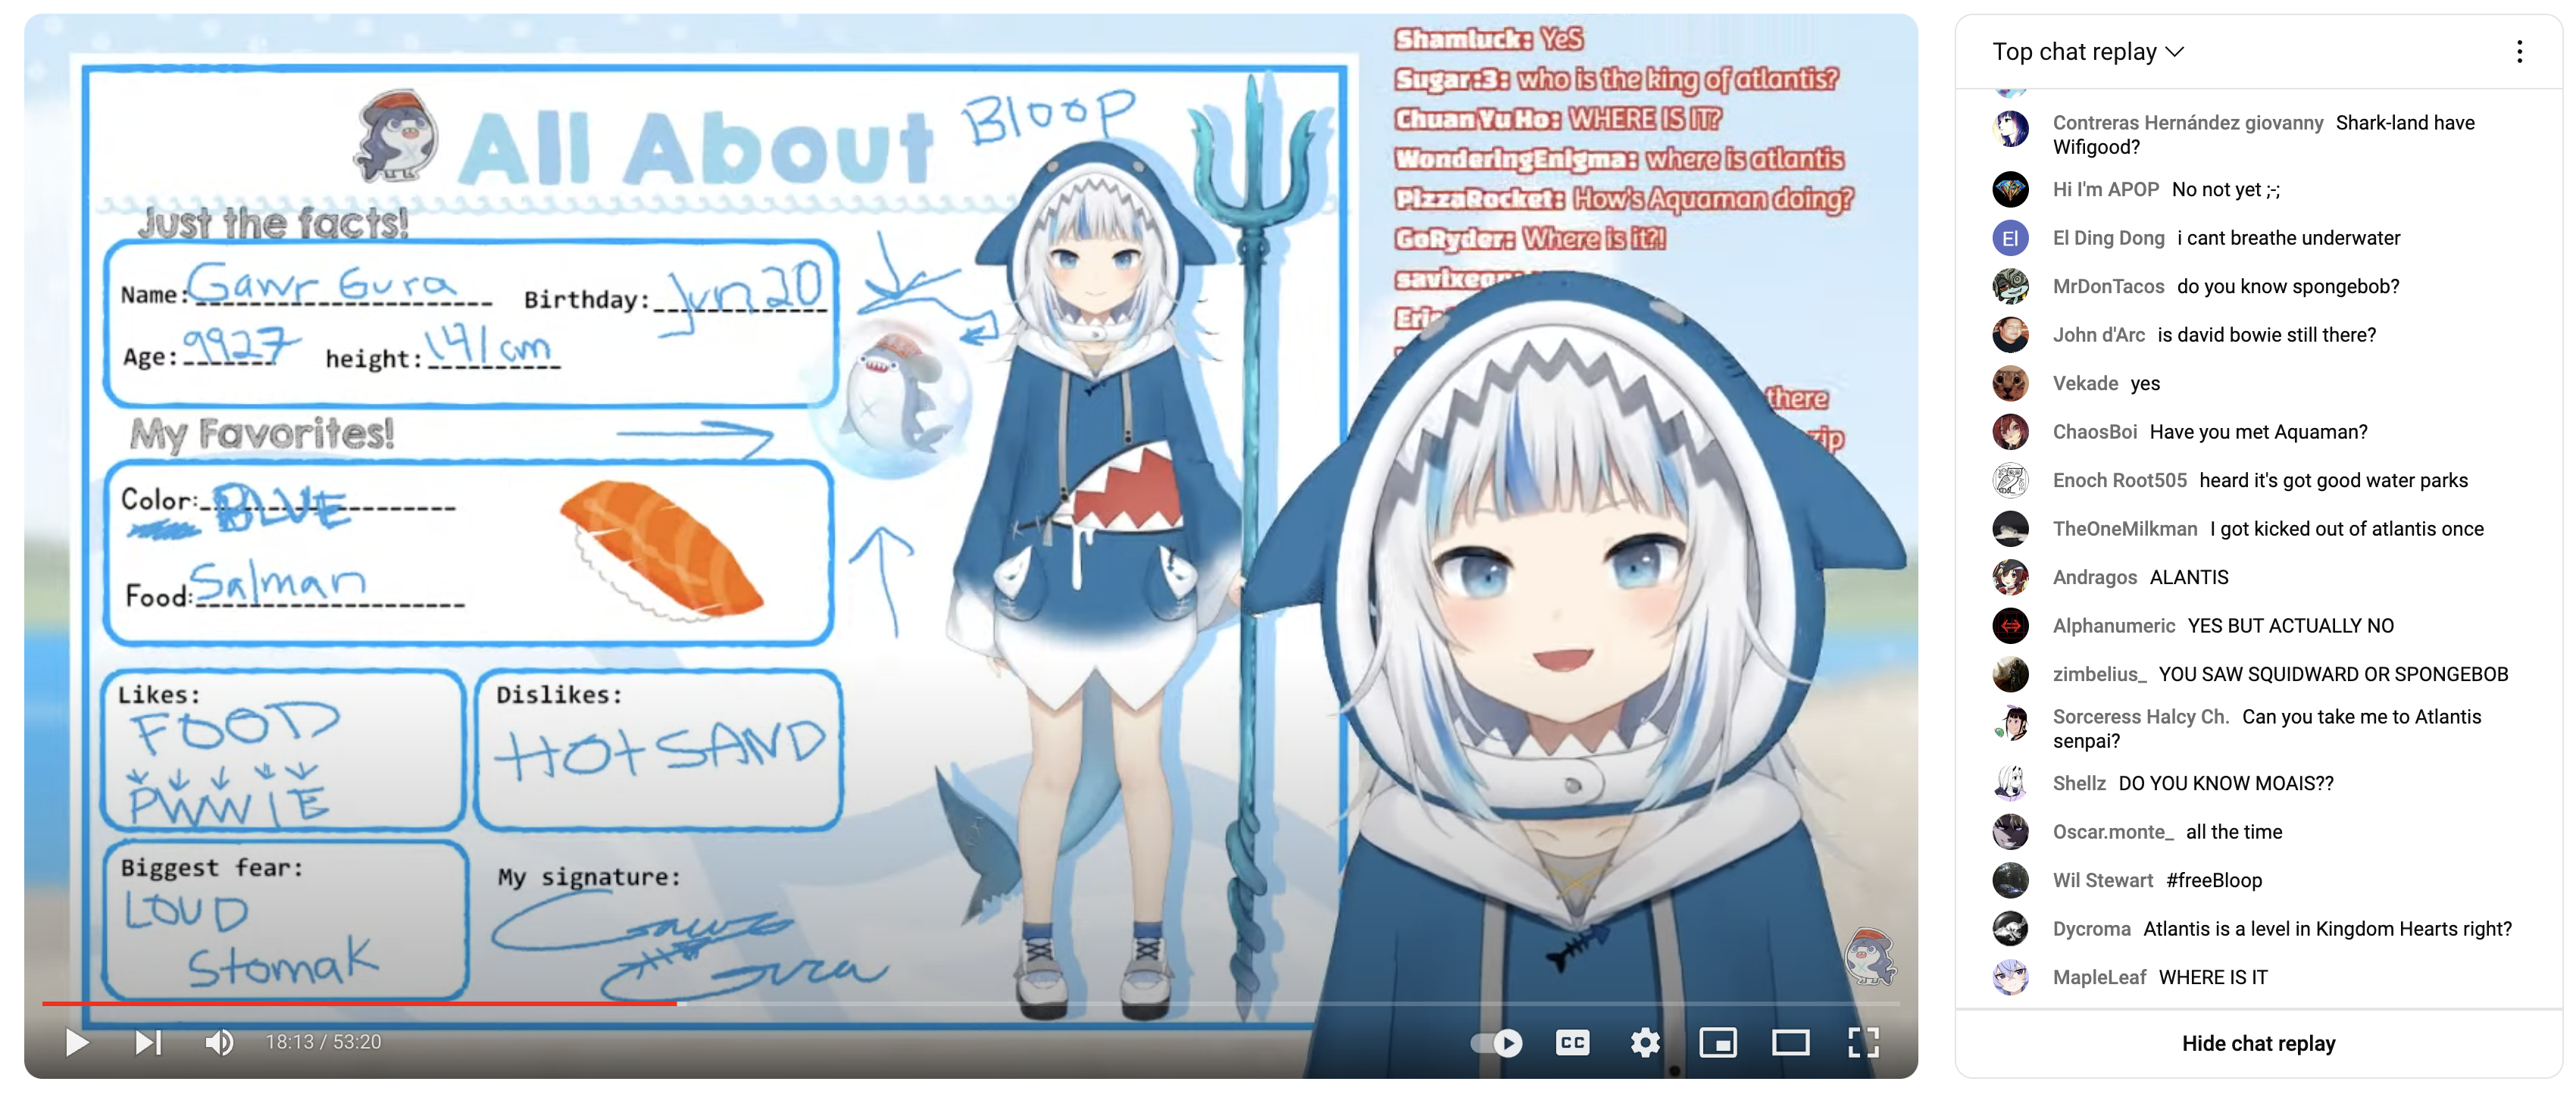 An anime character who is wearing a shark hoodie. Behind them is a screen that says All about bloop (with bloop written in scratchy hand-writing). Just the facts! Name: Gawr Gura. Birthday: Jun 20. Age 9927. Height: 141cm. My favorites! Color: Blue. Food: Salman. Likes: Food. PWWIE. Dislikes: Hot sand. Biggest fear: Loud Stomak.